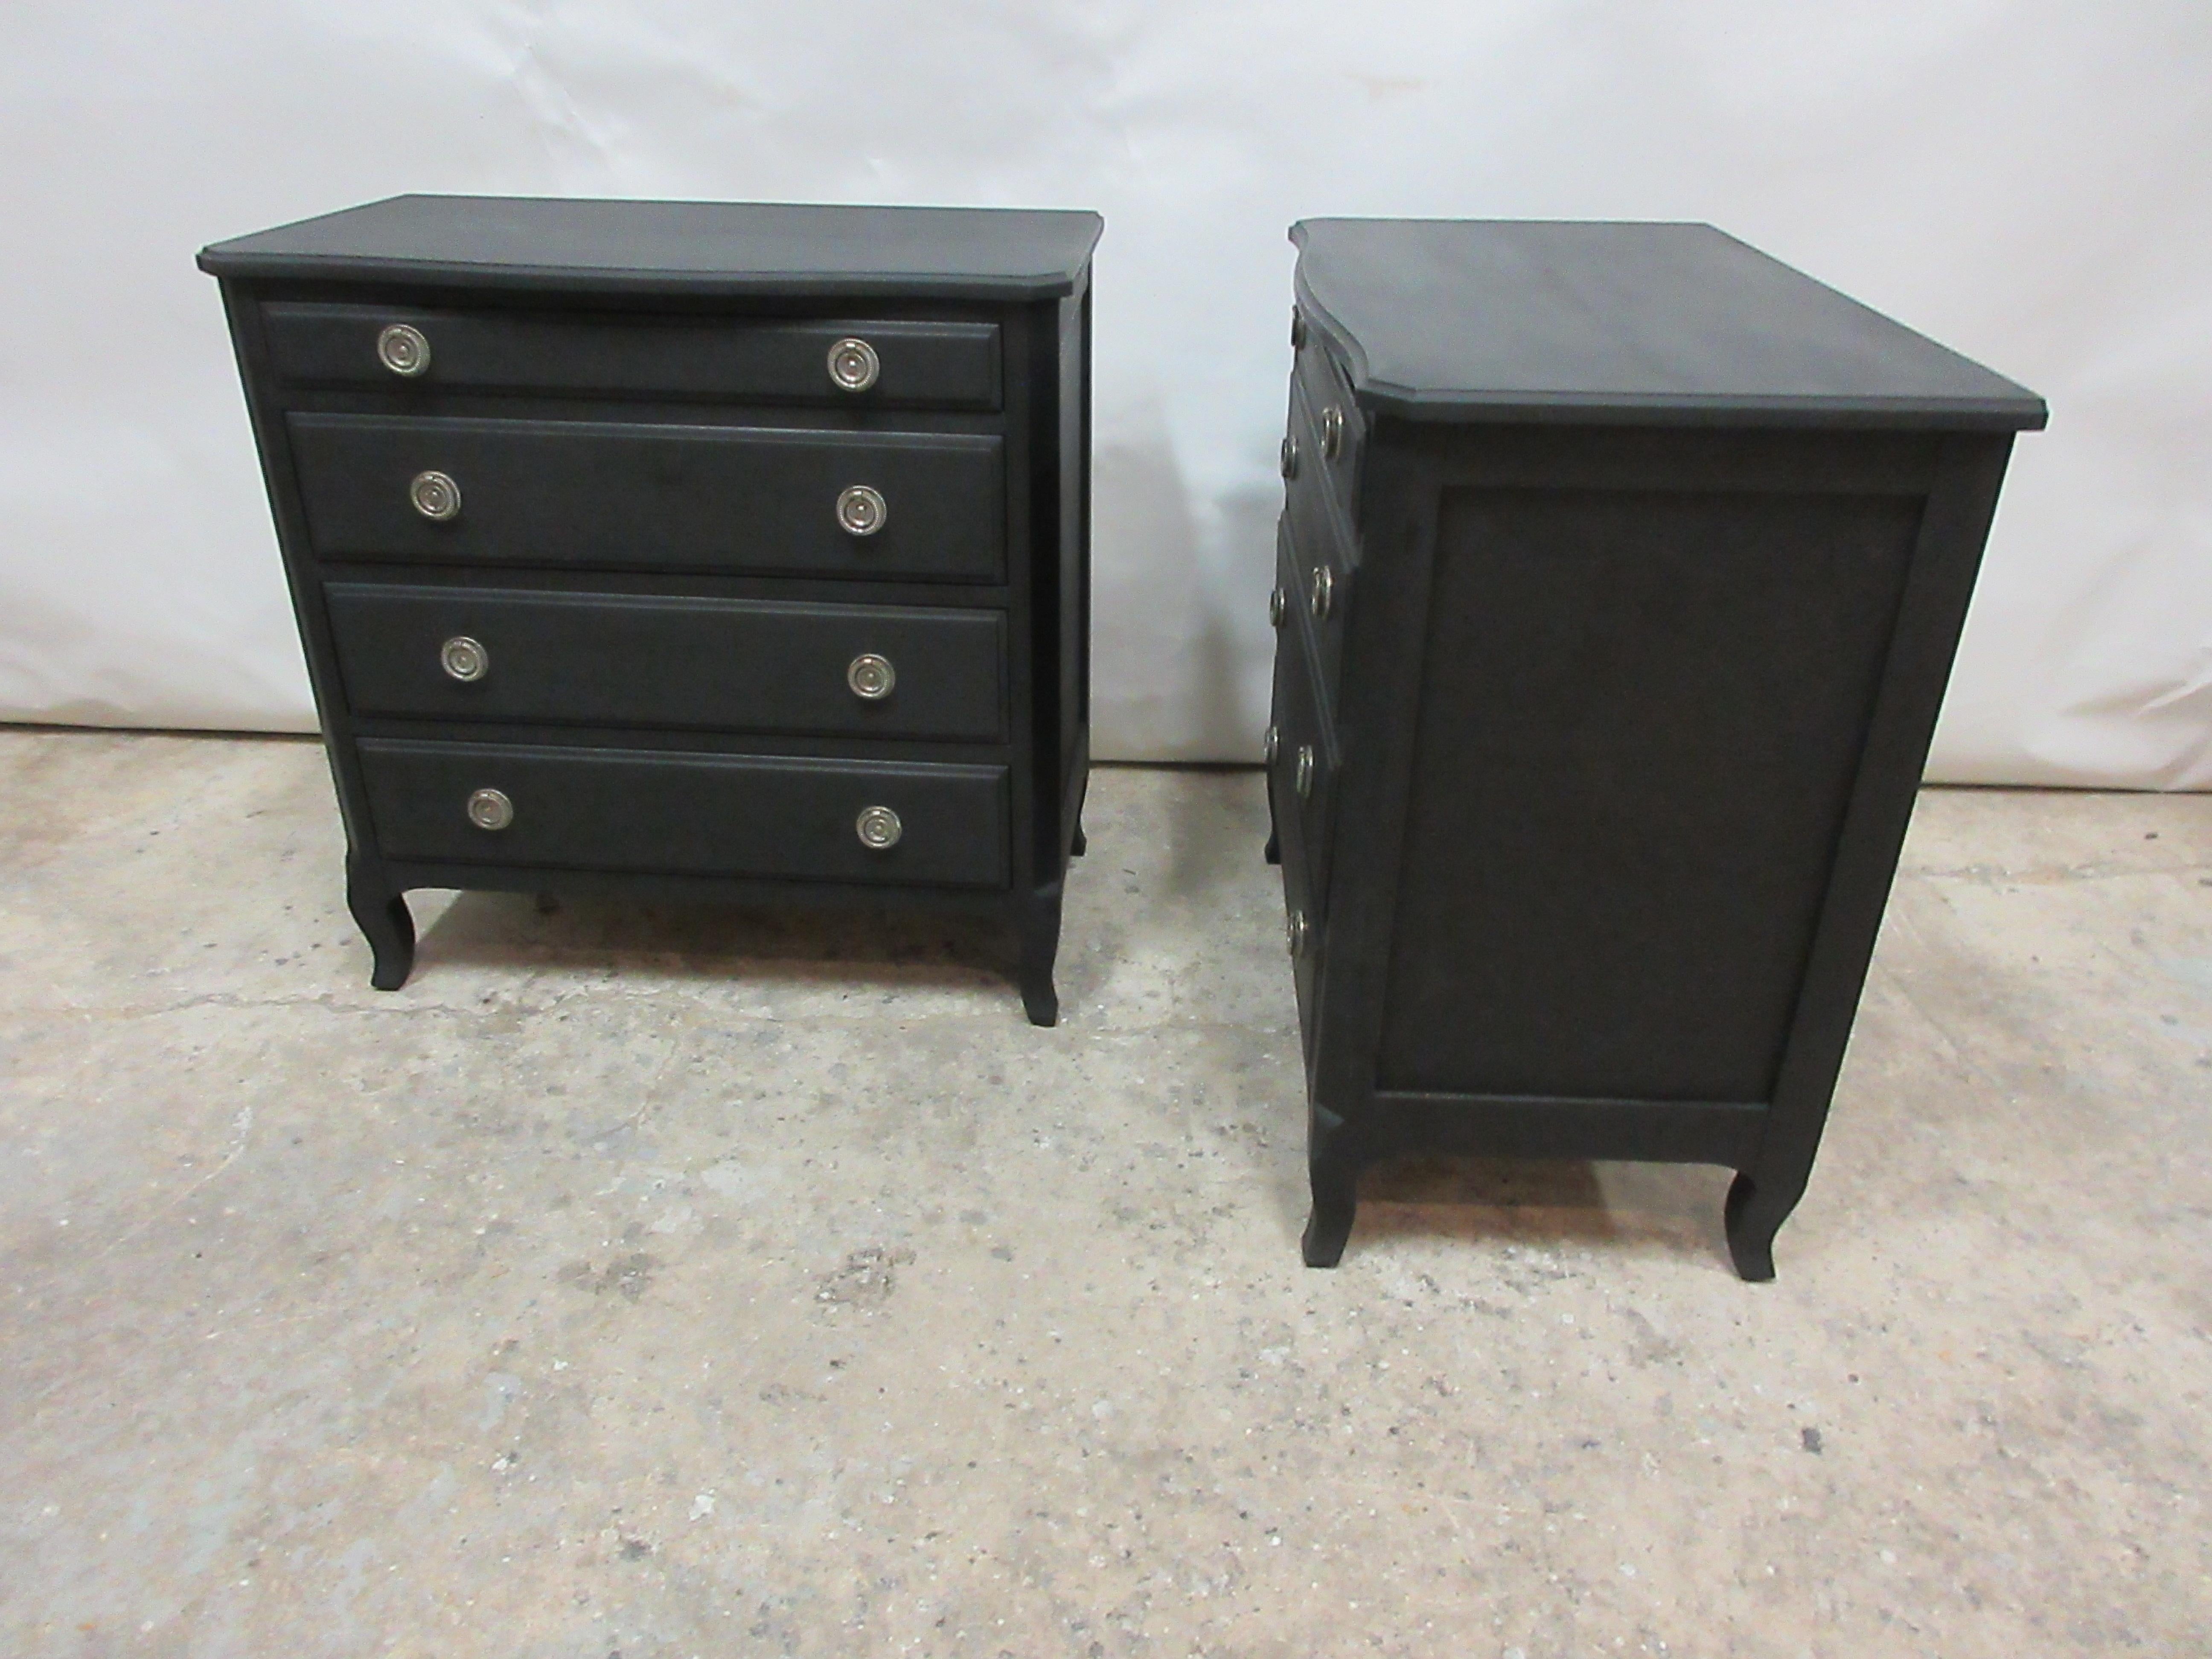 This is a matching midnight black chest of drawers. They have been restored and repainted with milk paints 